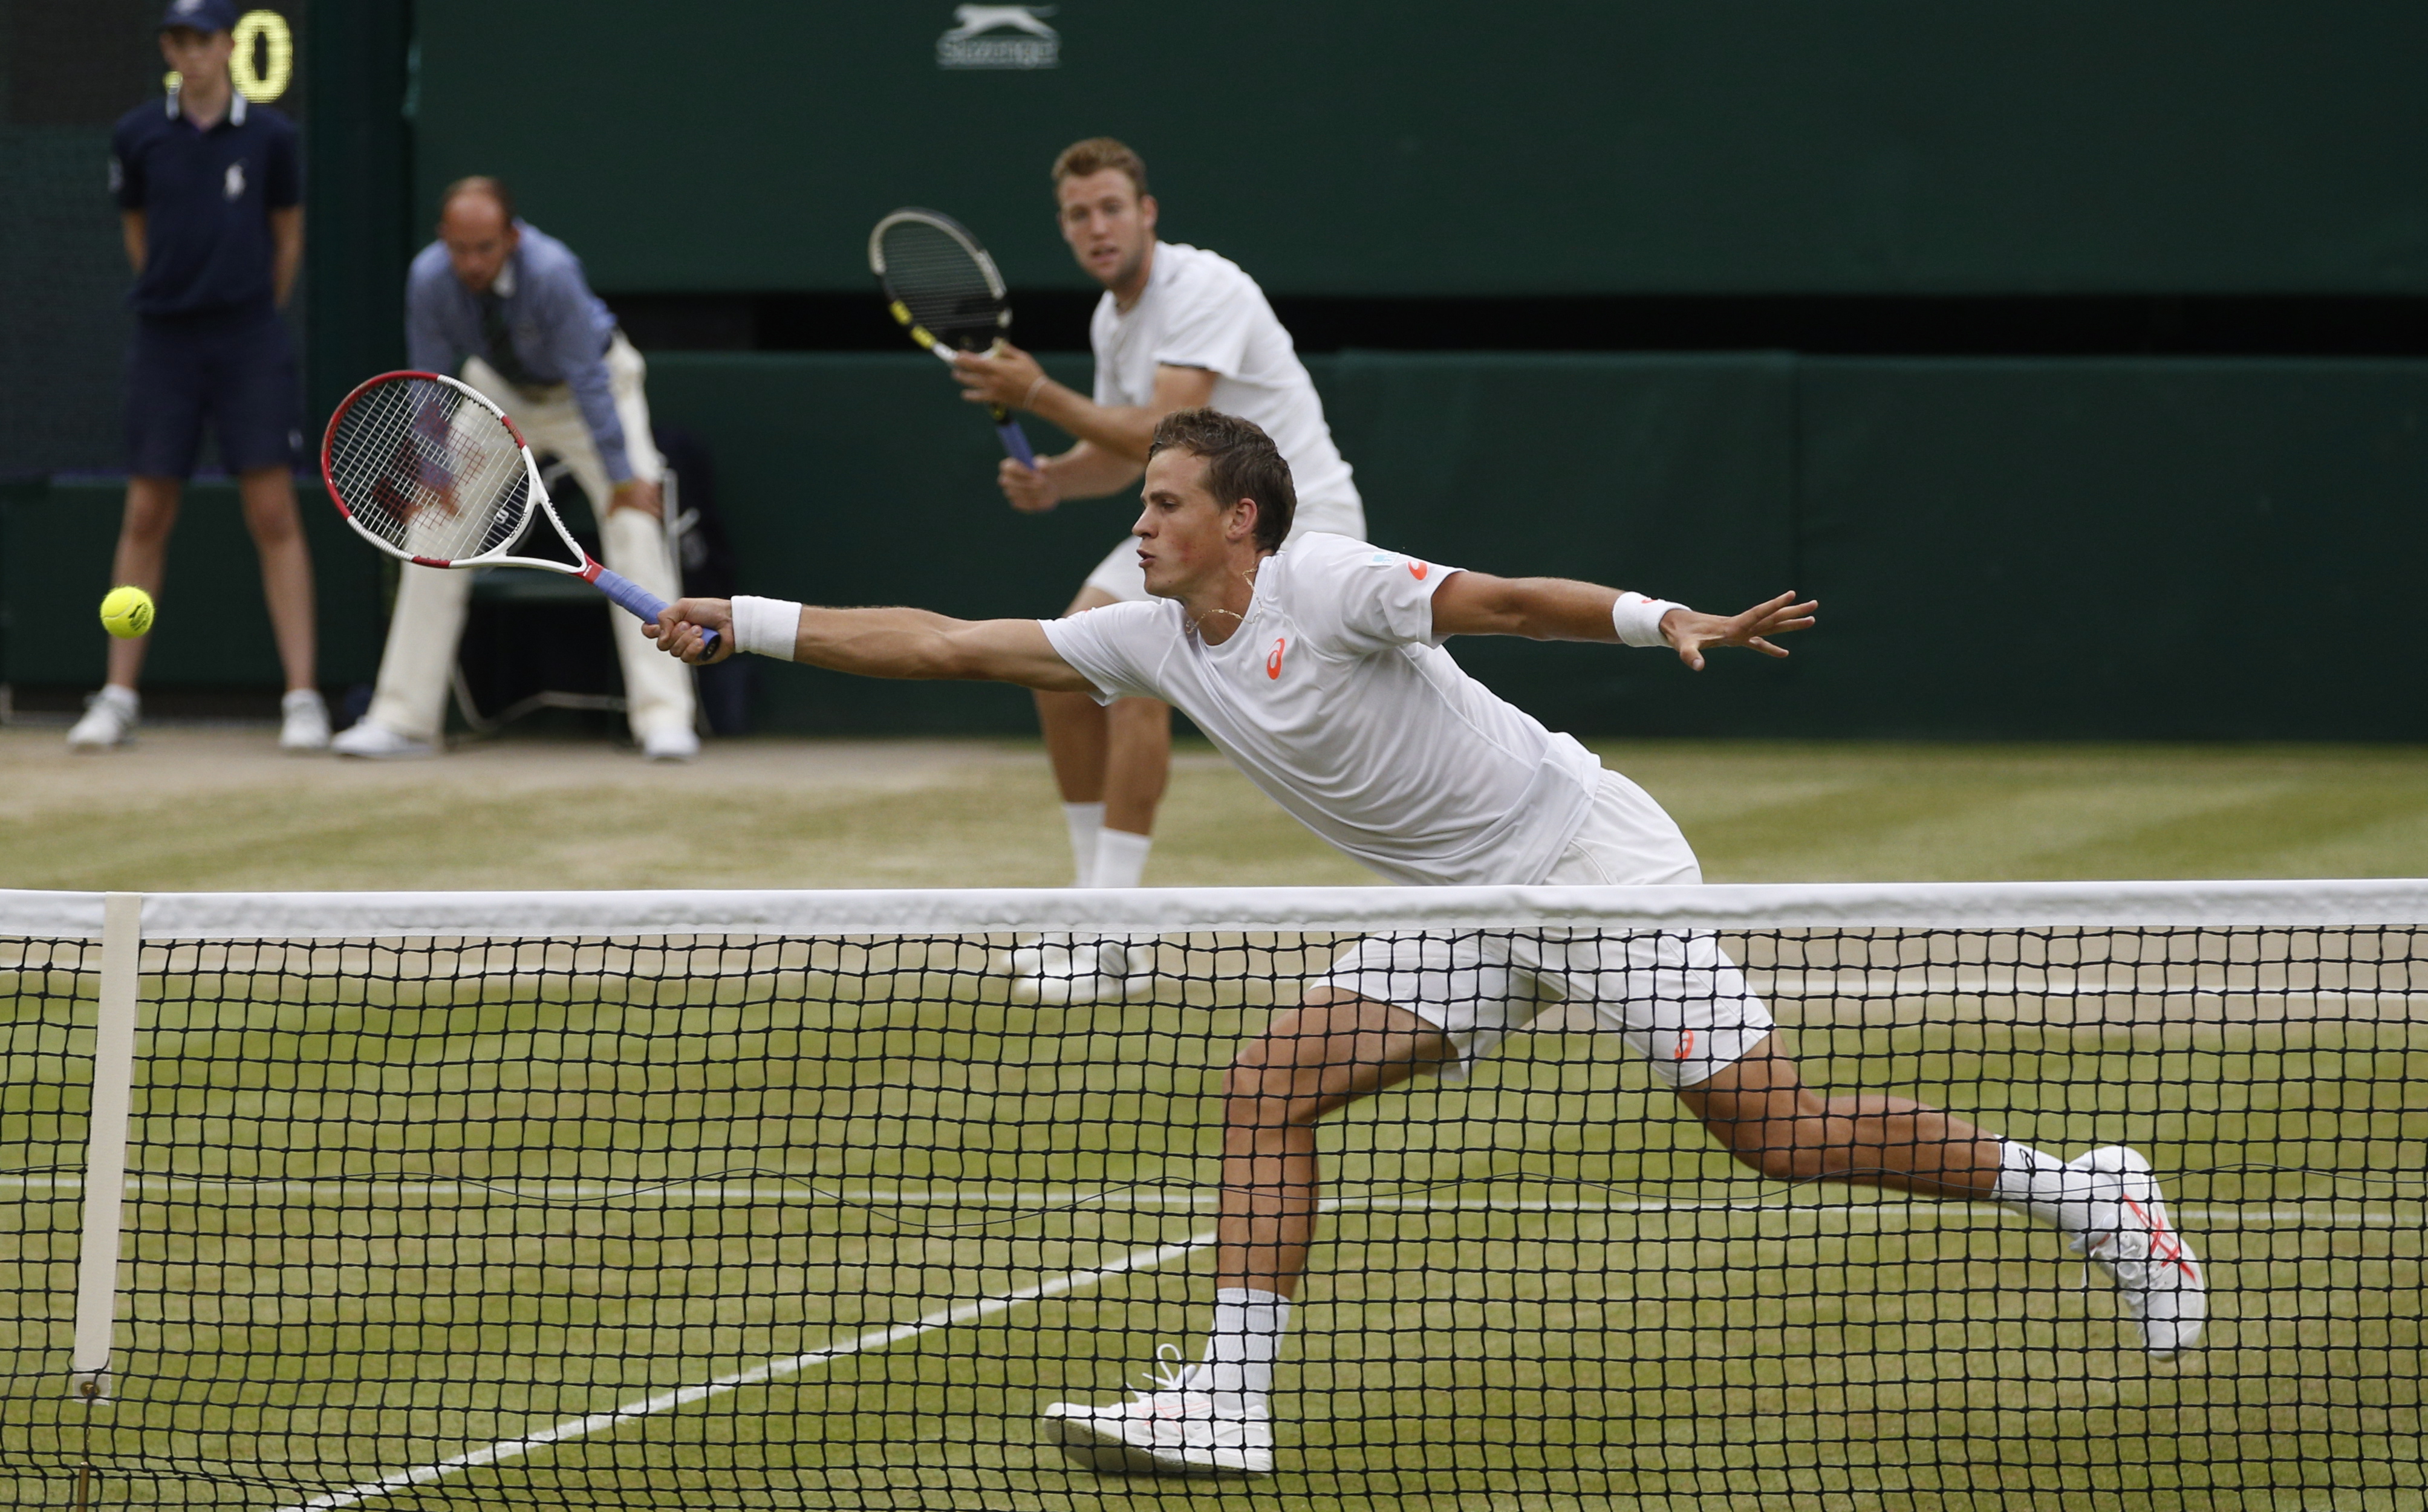 Vasek Pospisil of Canada, front, and Jack Sock of the U.S play a return during the men's doubles final against Bob Bryan and Mike Bryan of the U.S at the All England Lawn Tennis Championships in Wimbledon, London, Saturday, July 5, 2014. (AP Photo/Pavel Golovkin)